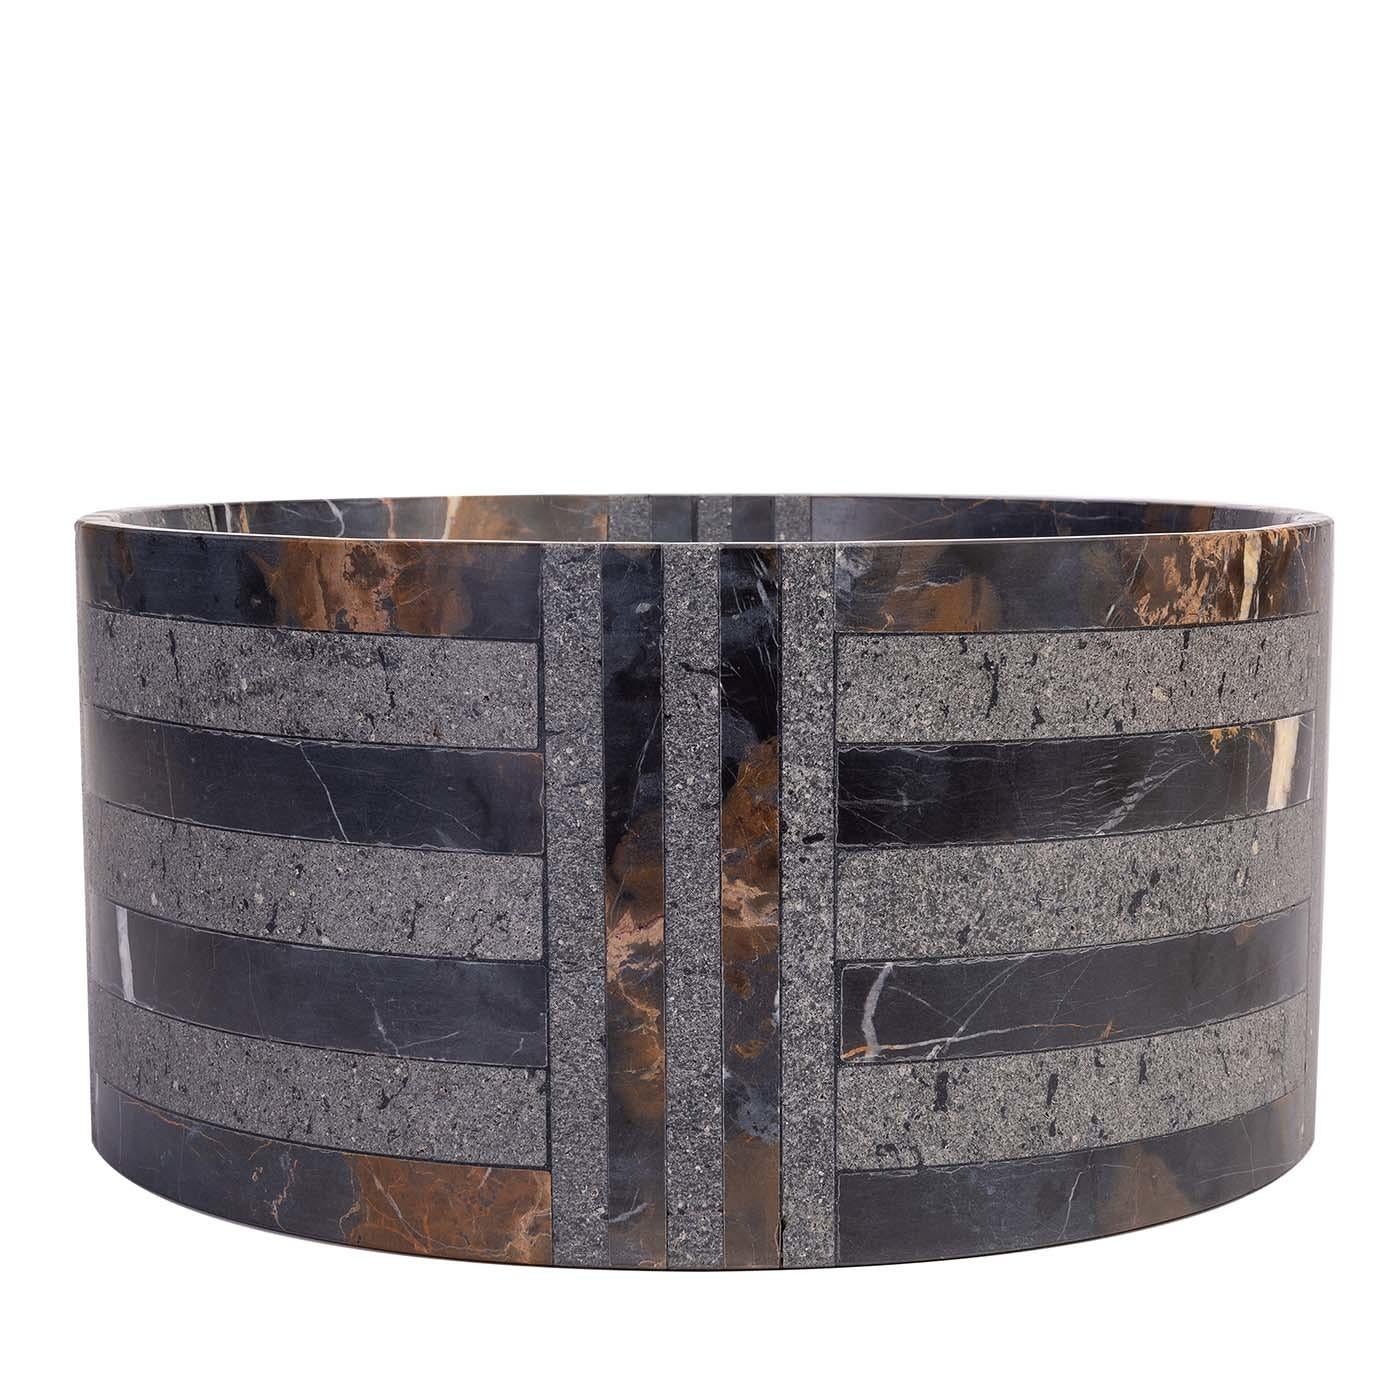 A striking mix of striped and checkerboard patterns grace this superb bowl of the Hacker collection by Paolo De Vivo. Entirely handcrafted of basalt, the hypnotic combination of deep black and gold-speckled fine-grained textures infuse this piece